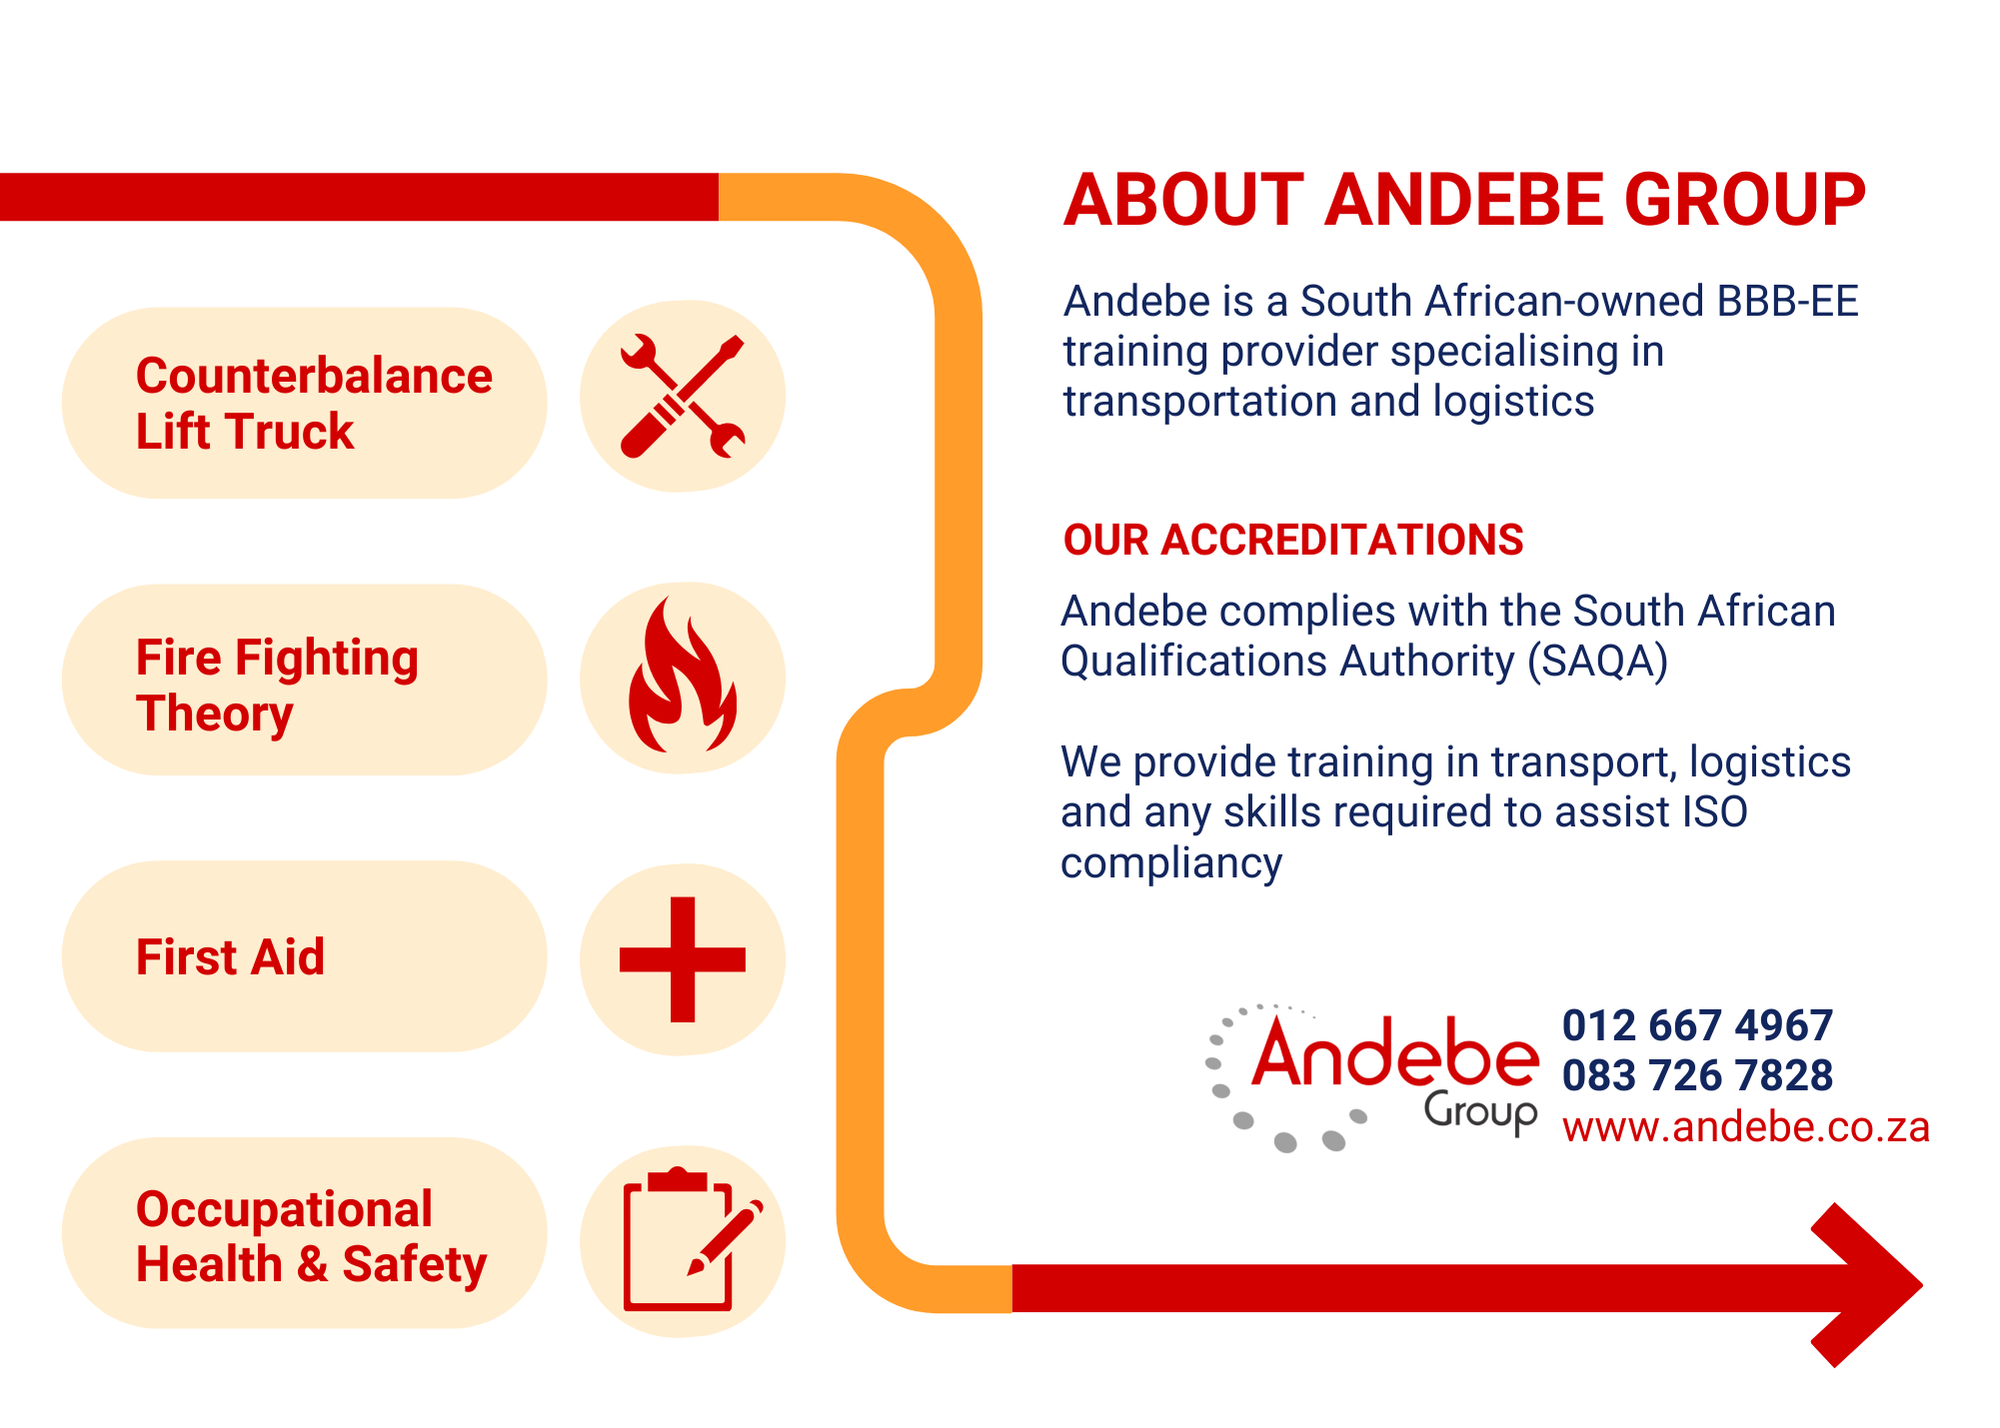 ABOUT ANDEBE GROUP